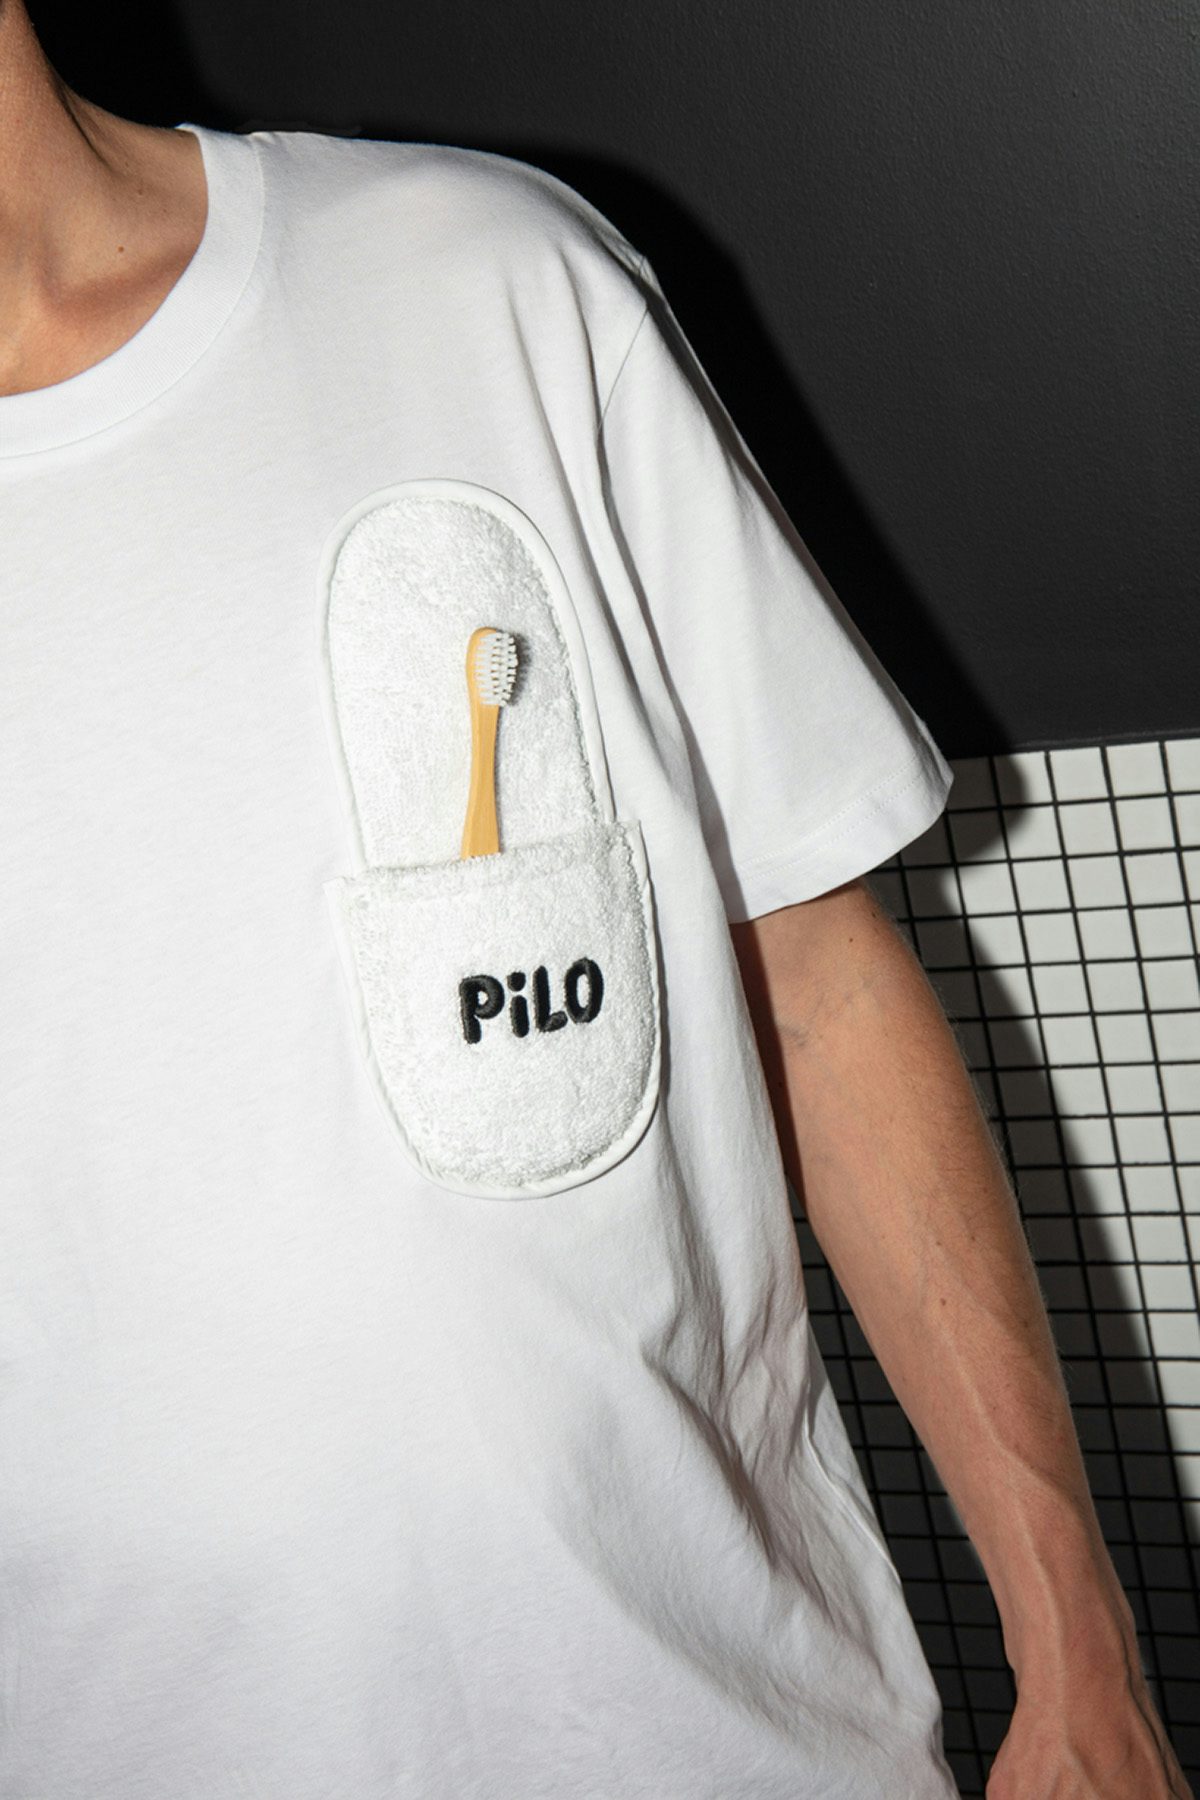 Photo showing Pilo's black bubbly font written on a slipper attached to a T-shirt in the place of a pocket